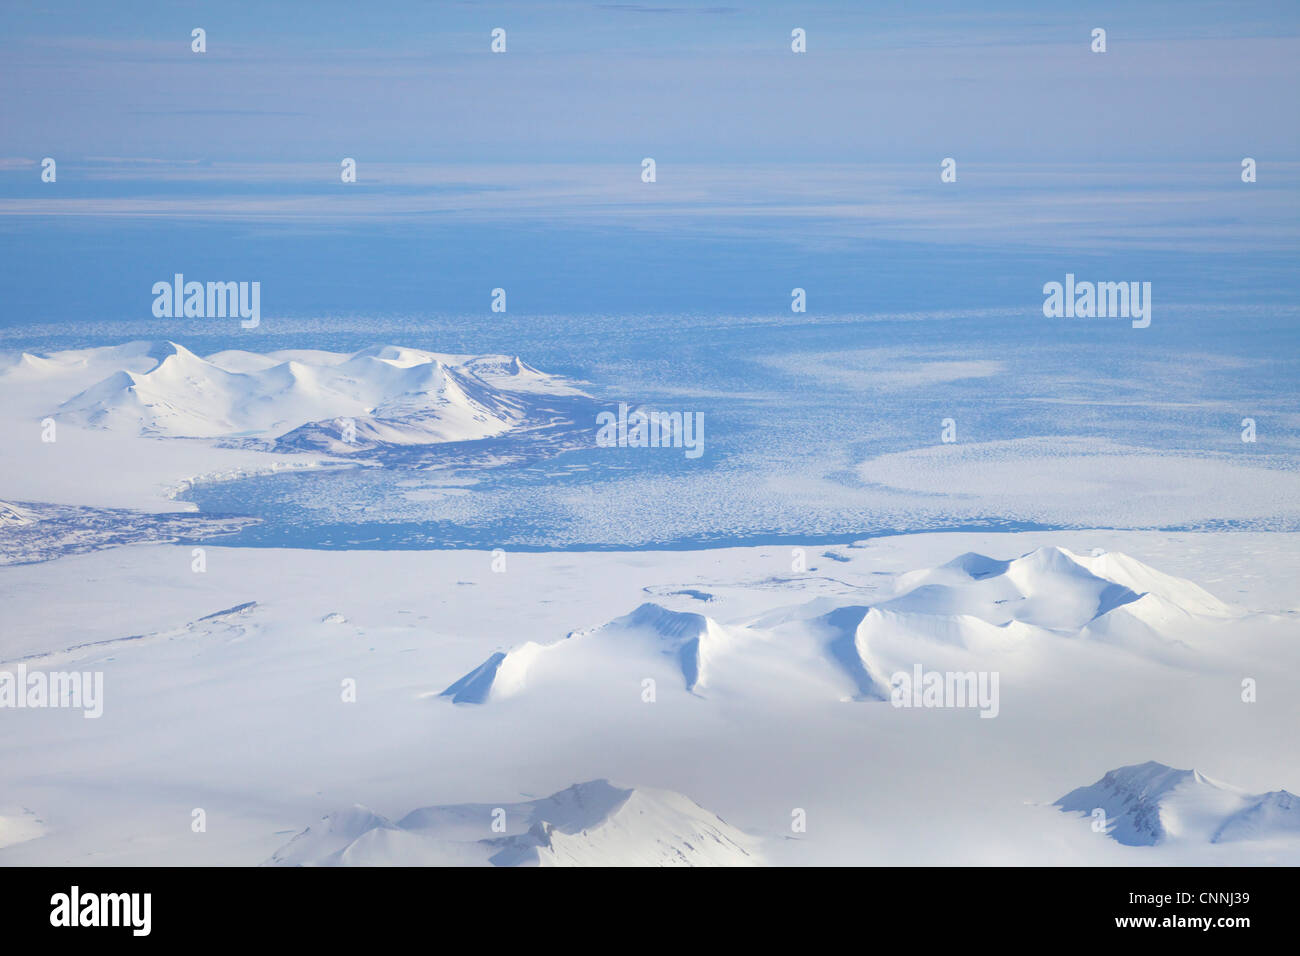 Aerial view of sea ice in summer off the coast of Spitzbergen, Svalbard, Arctic Norway, Europe Stock Photo